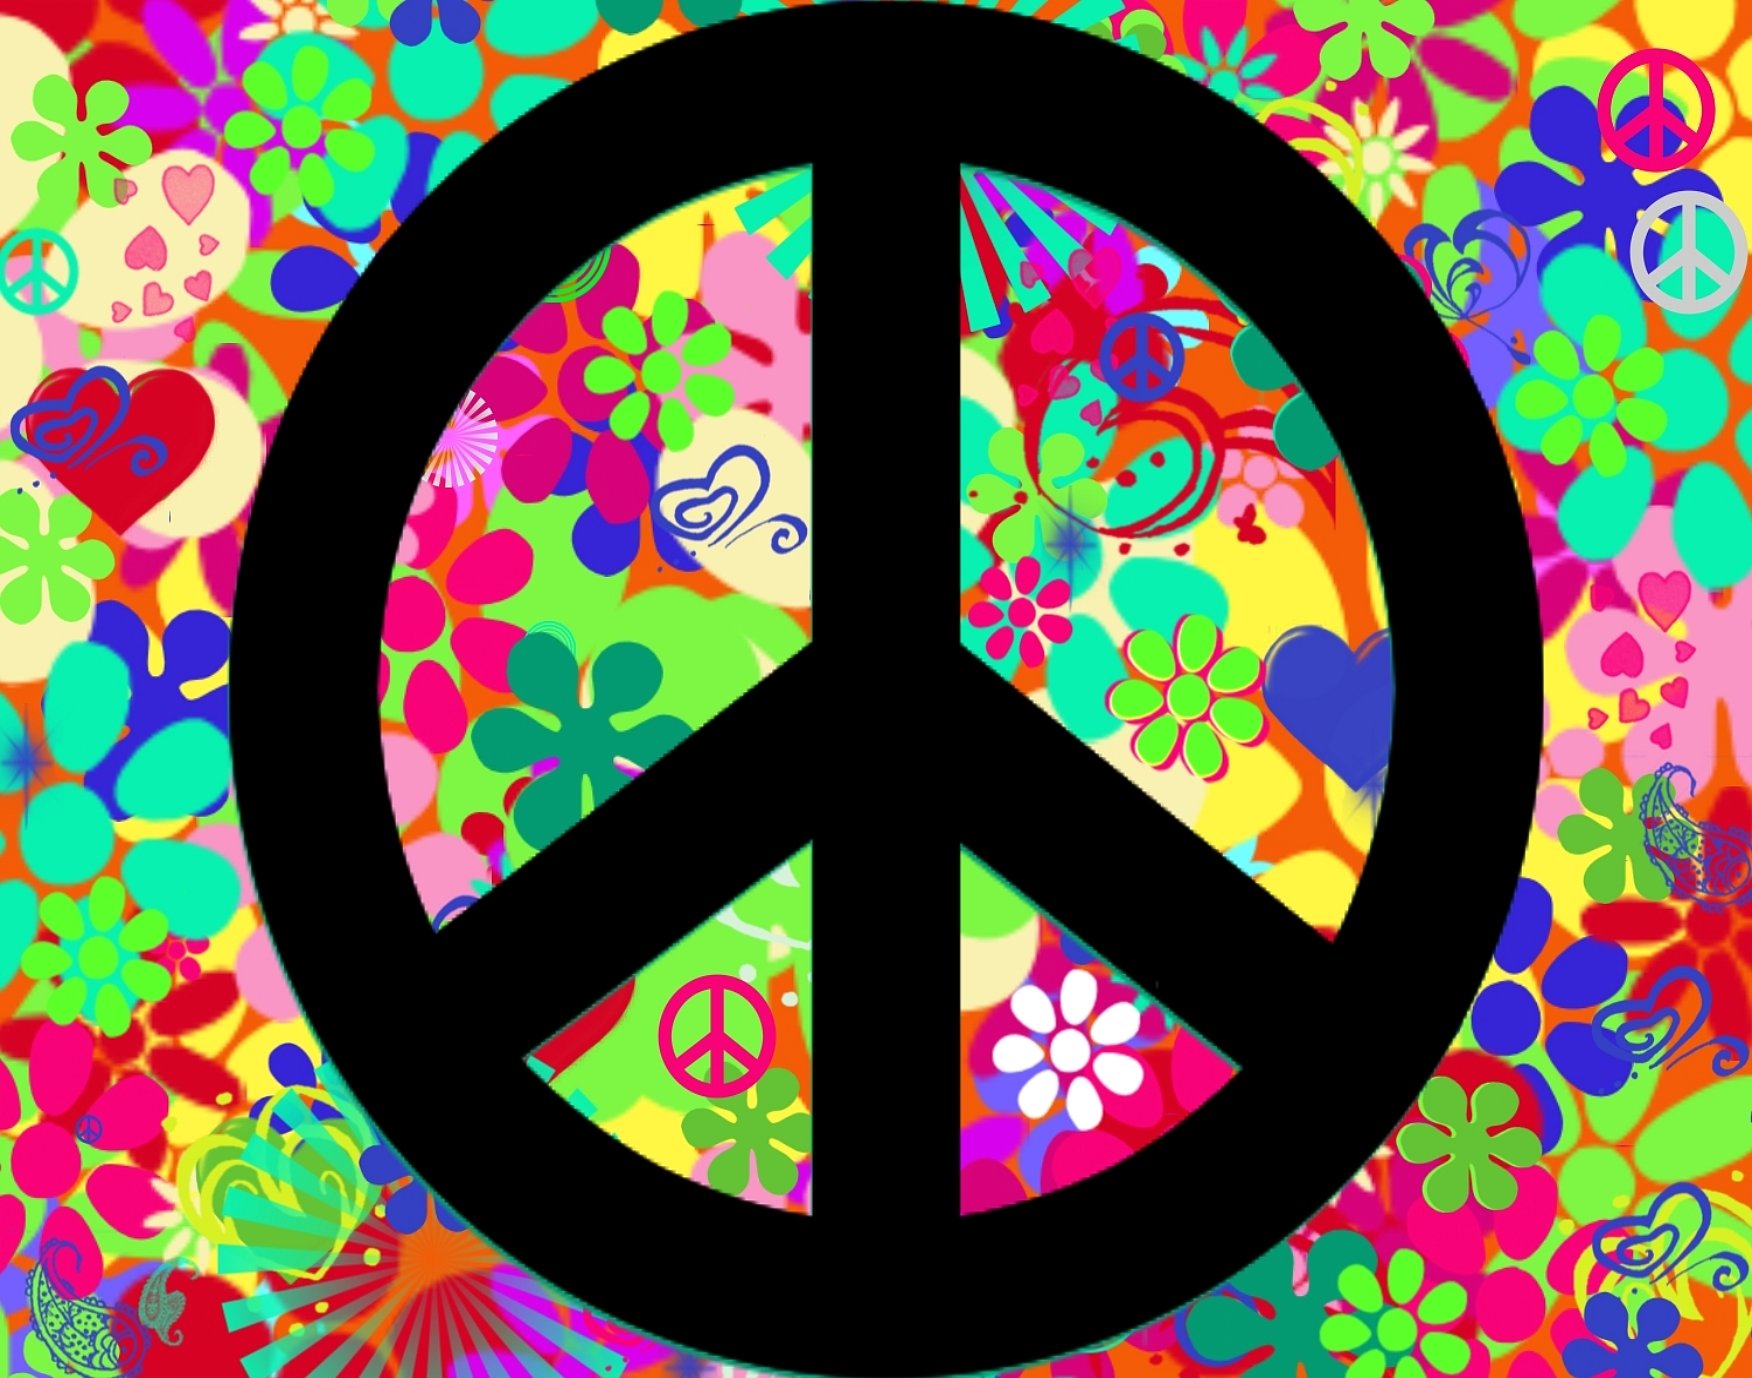 Cute Peace Signs Wallpaper Peace sign backgrounds cake